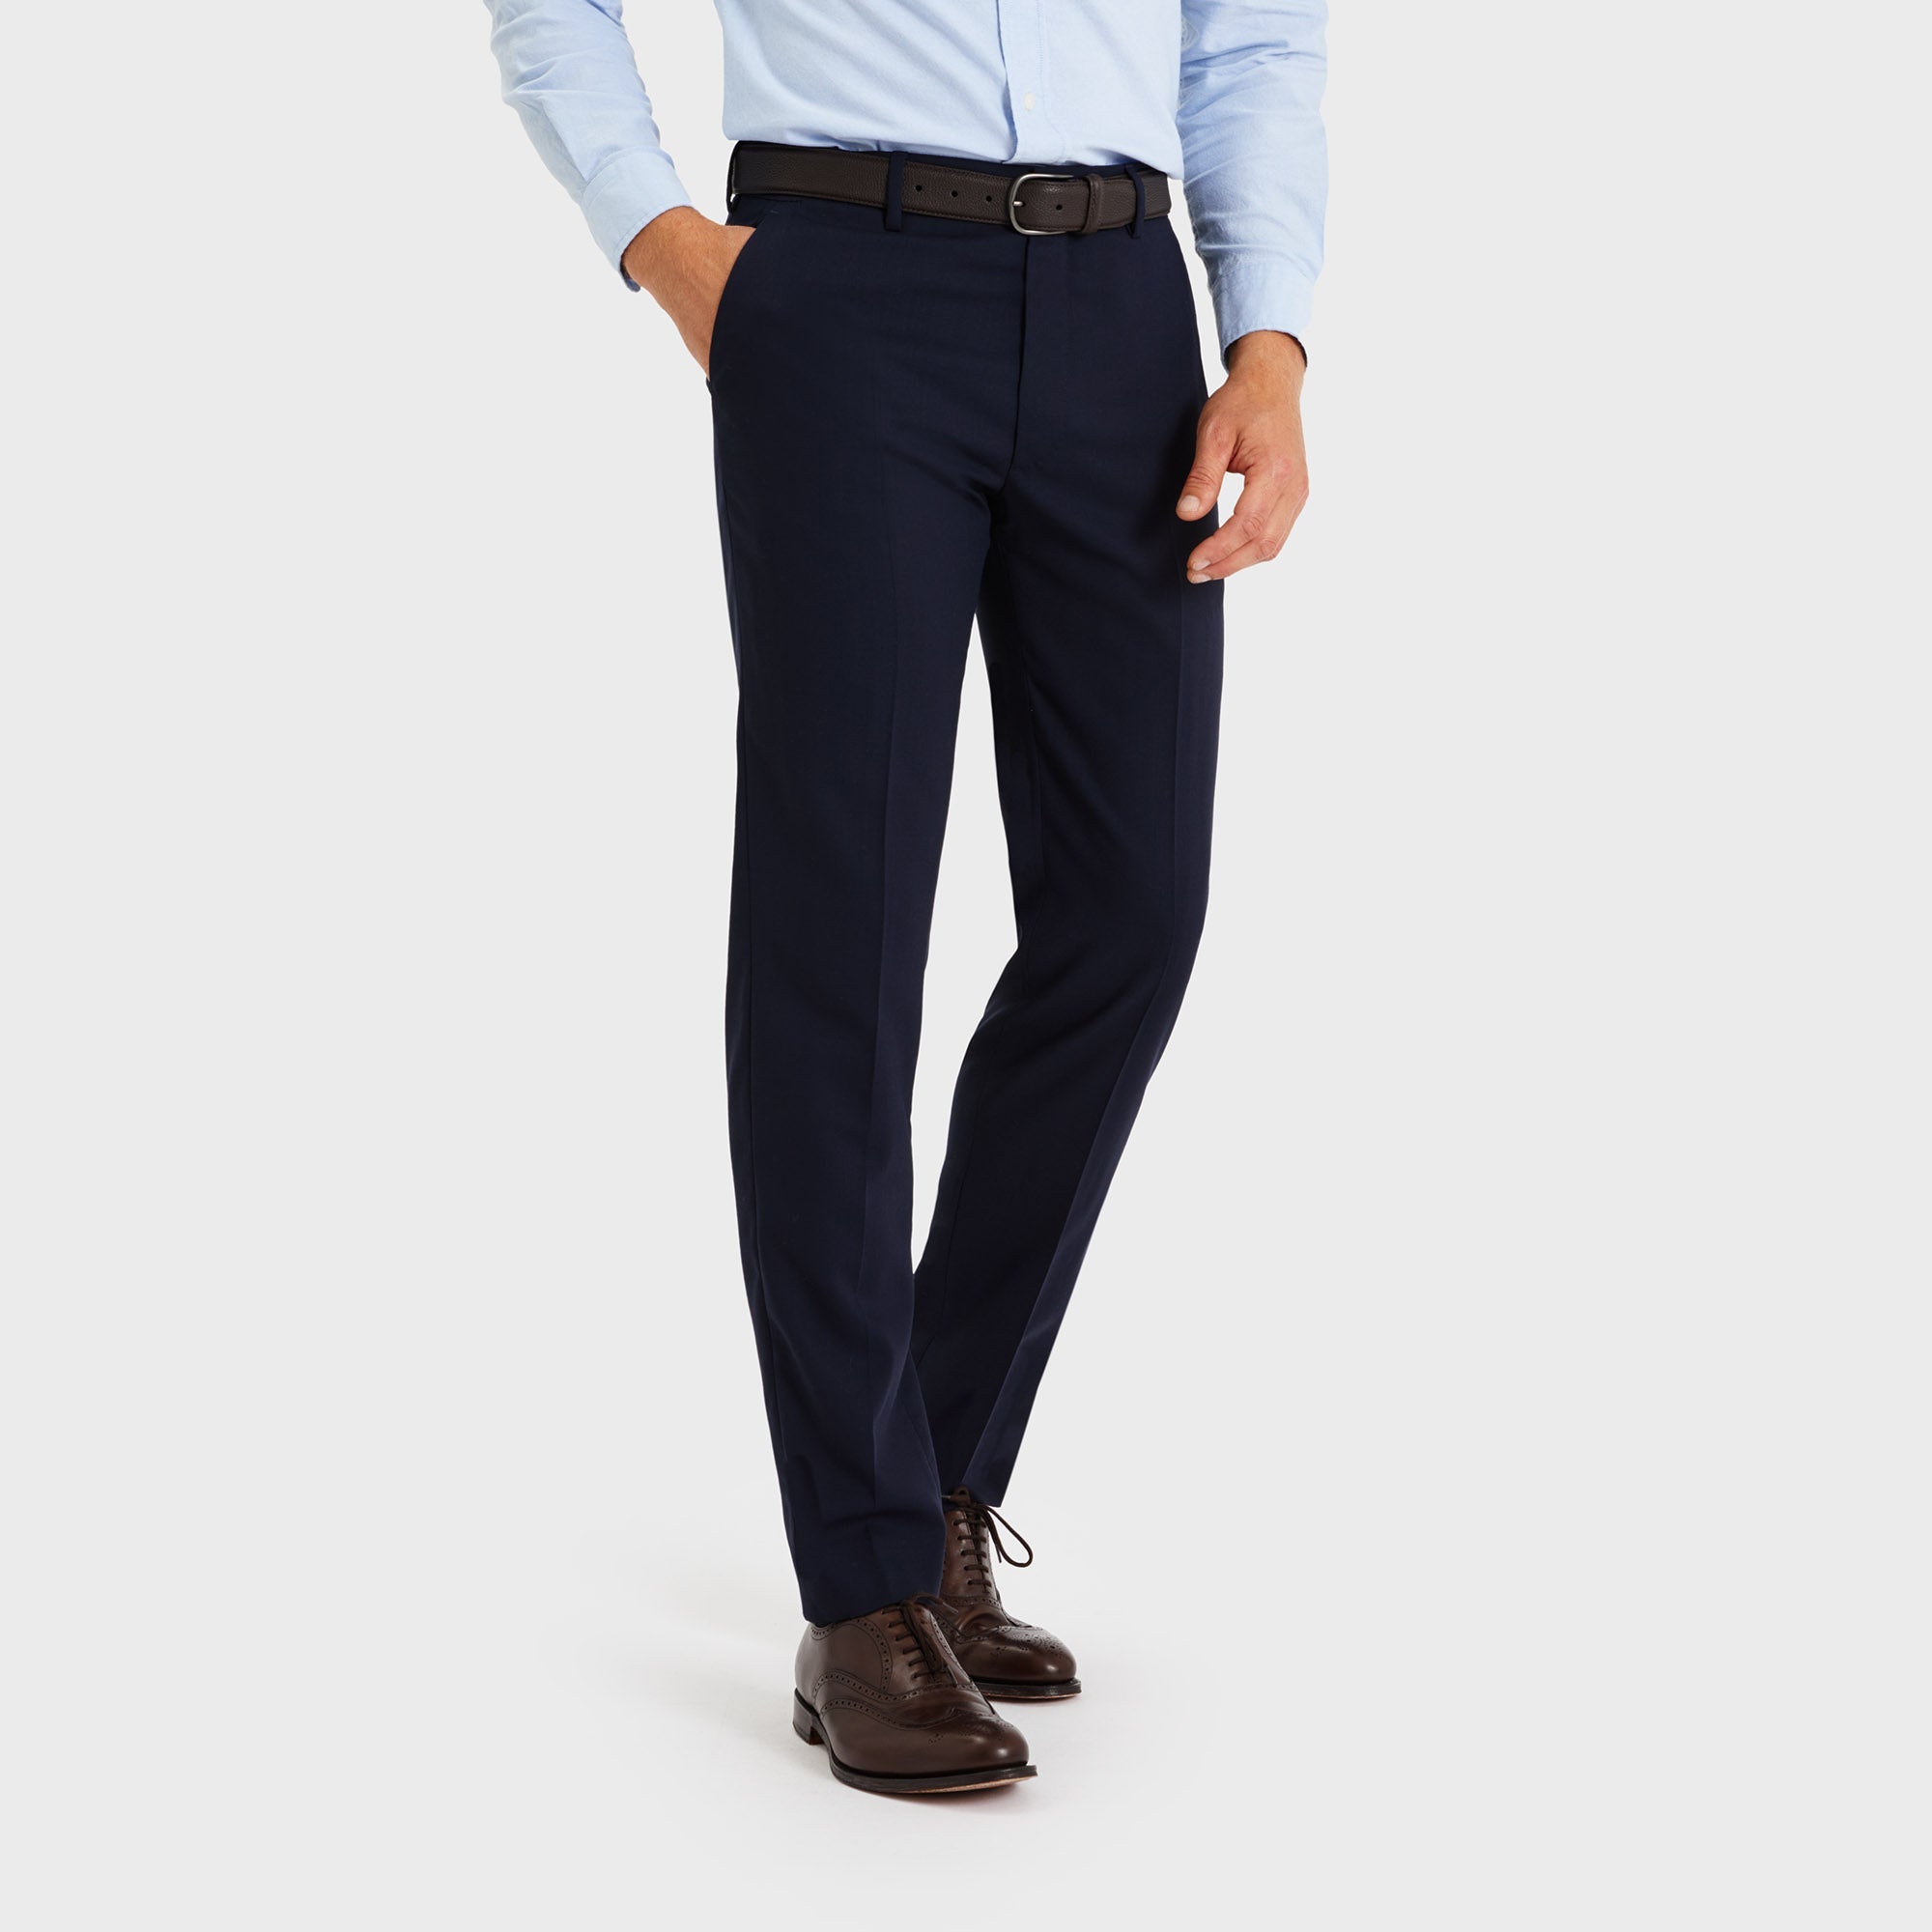 COLLUSION tailored smart trousers in dark navy | ASOS